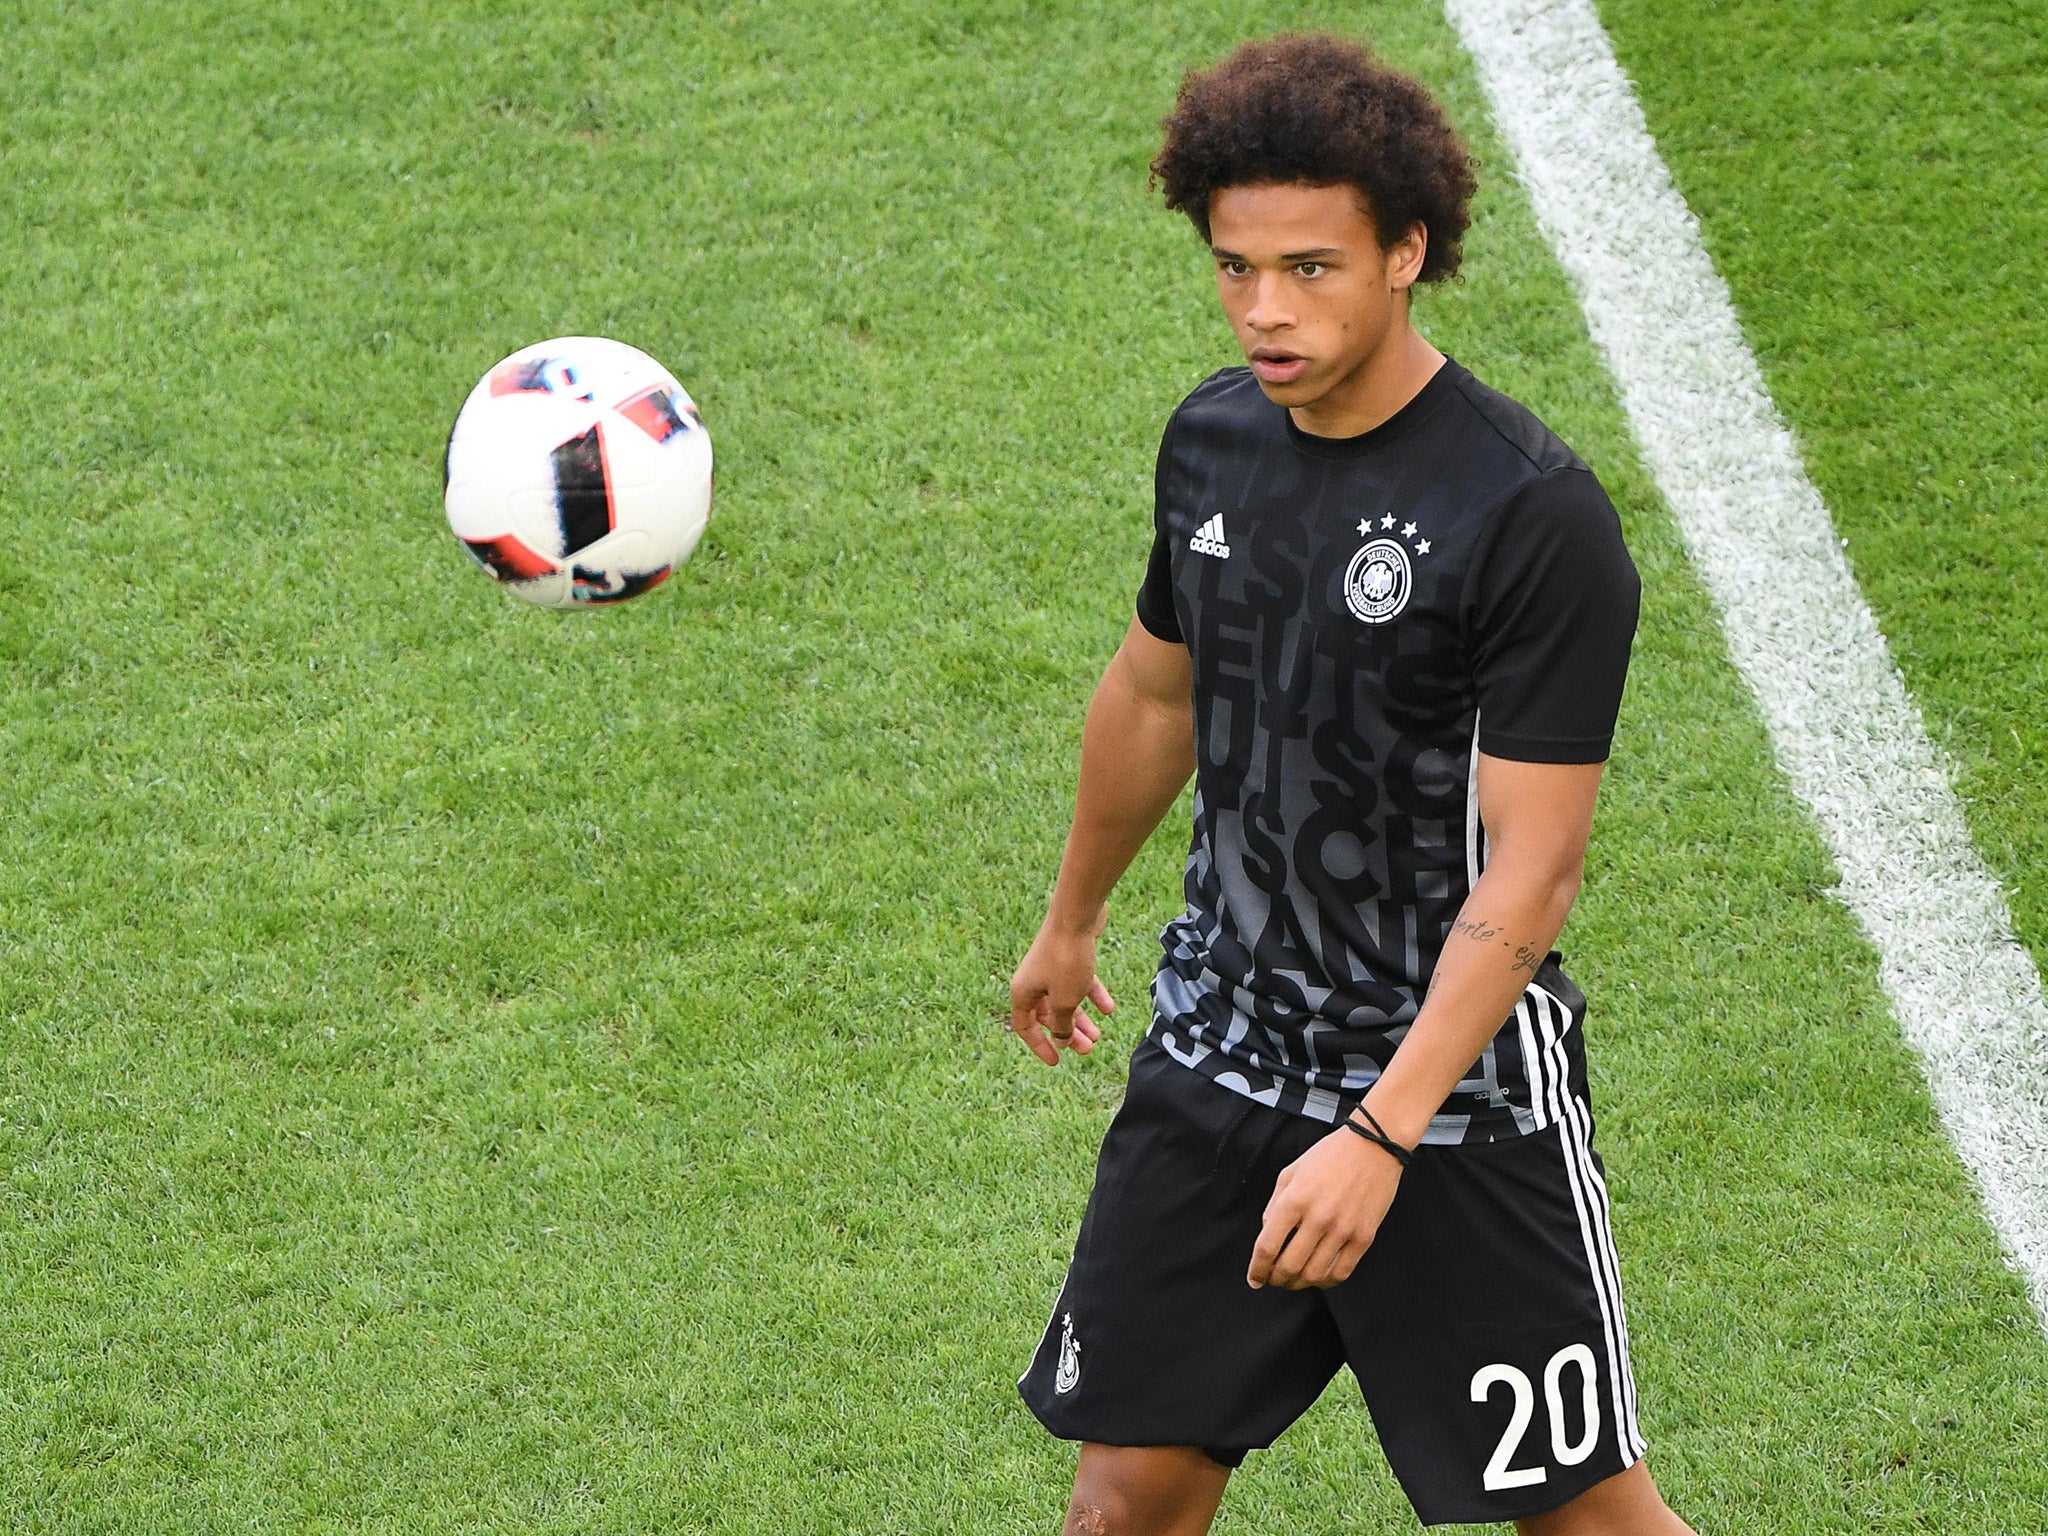 Schalke's Leroy Sane is a target for Manchester City, Pep Guardiola has confirmed